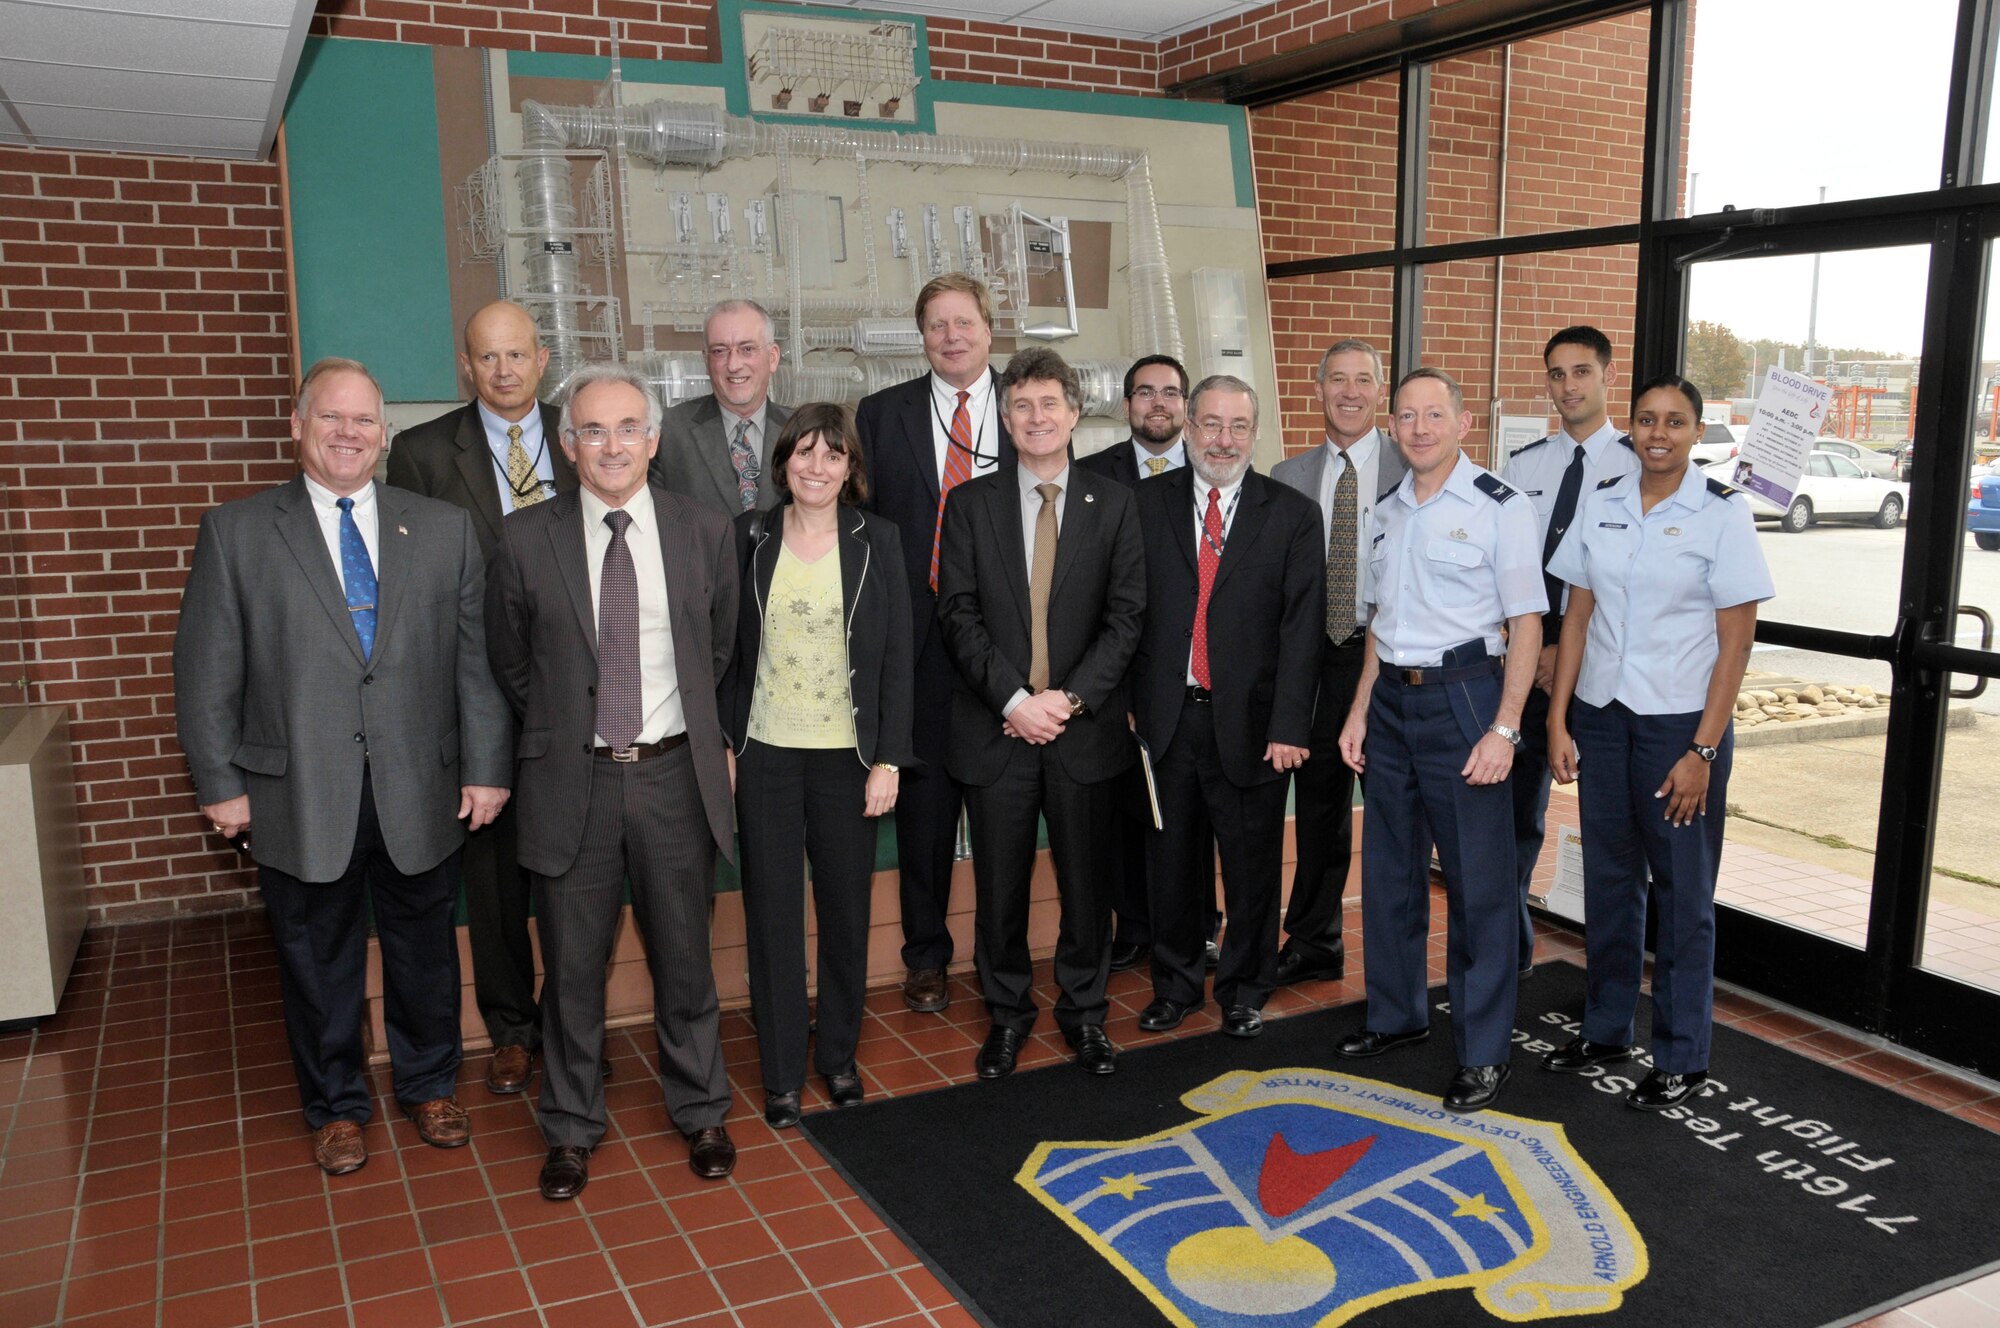 From left to right:  Arnold Engineering Development Center (AEDC) Export Control Officer Mackie Snipes, AEDC Senior Engineer Jack Walters, Jean-Claude Traineau (ONERA), Stephen Wolf (ONERA), and Florence Roudolff (ONERA), Mike George (NASA), Patrick Wagner (ONERA), Mike Wetzel, Armaments Cooperation Division, Deputy Under Secretary of the Air Force (SAF/IAPQ), AEDC Technical Director of the Plans and Programs Directorate Tom Best, ATA Director of Test and Evaluation Philip Stich, AEDC Vice Commander Col. Eugene Mittuch, 716th Test Squadron’s Capt. Brandon Herndon and 2nd Lt. Charmeeka Scroggins gathered for a group photo in the lobby of Propulsion Wind Tunnel Facility during the French group’s recent visit to AEDC. Jean-Claude Traineau is the director of the Le Fauga-Mauzac Wind Tunnel Department, ONERA. Wagner is the head of Computing, Engineering and Testing Facilities at ONERA. Florence Roudolff is the director of the Design, Engineering and Manufacturing department in ONERA's Computing, Engineering and Testing Facilities unit. (Photo by Rick Goodfriend)